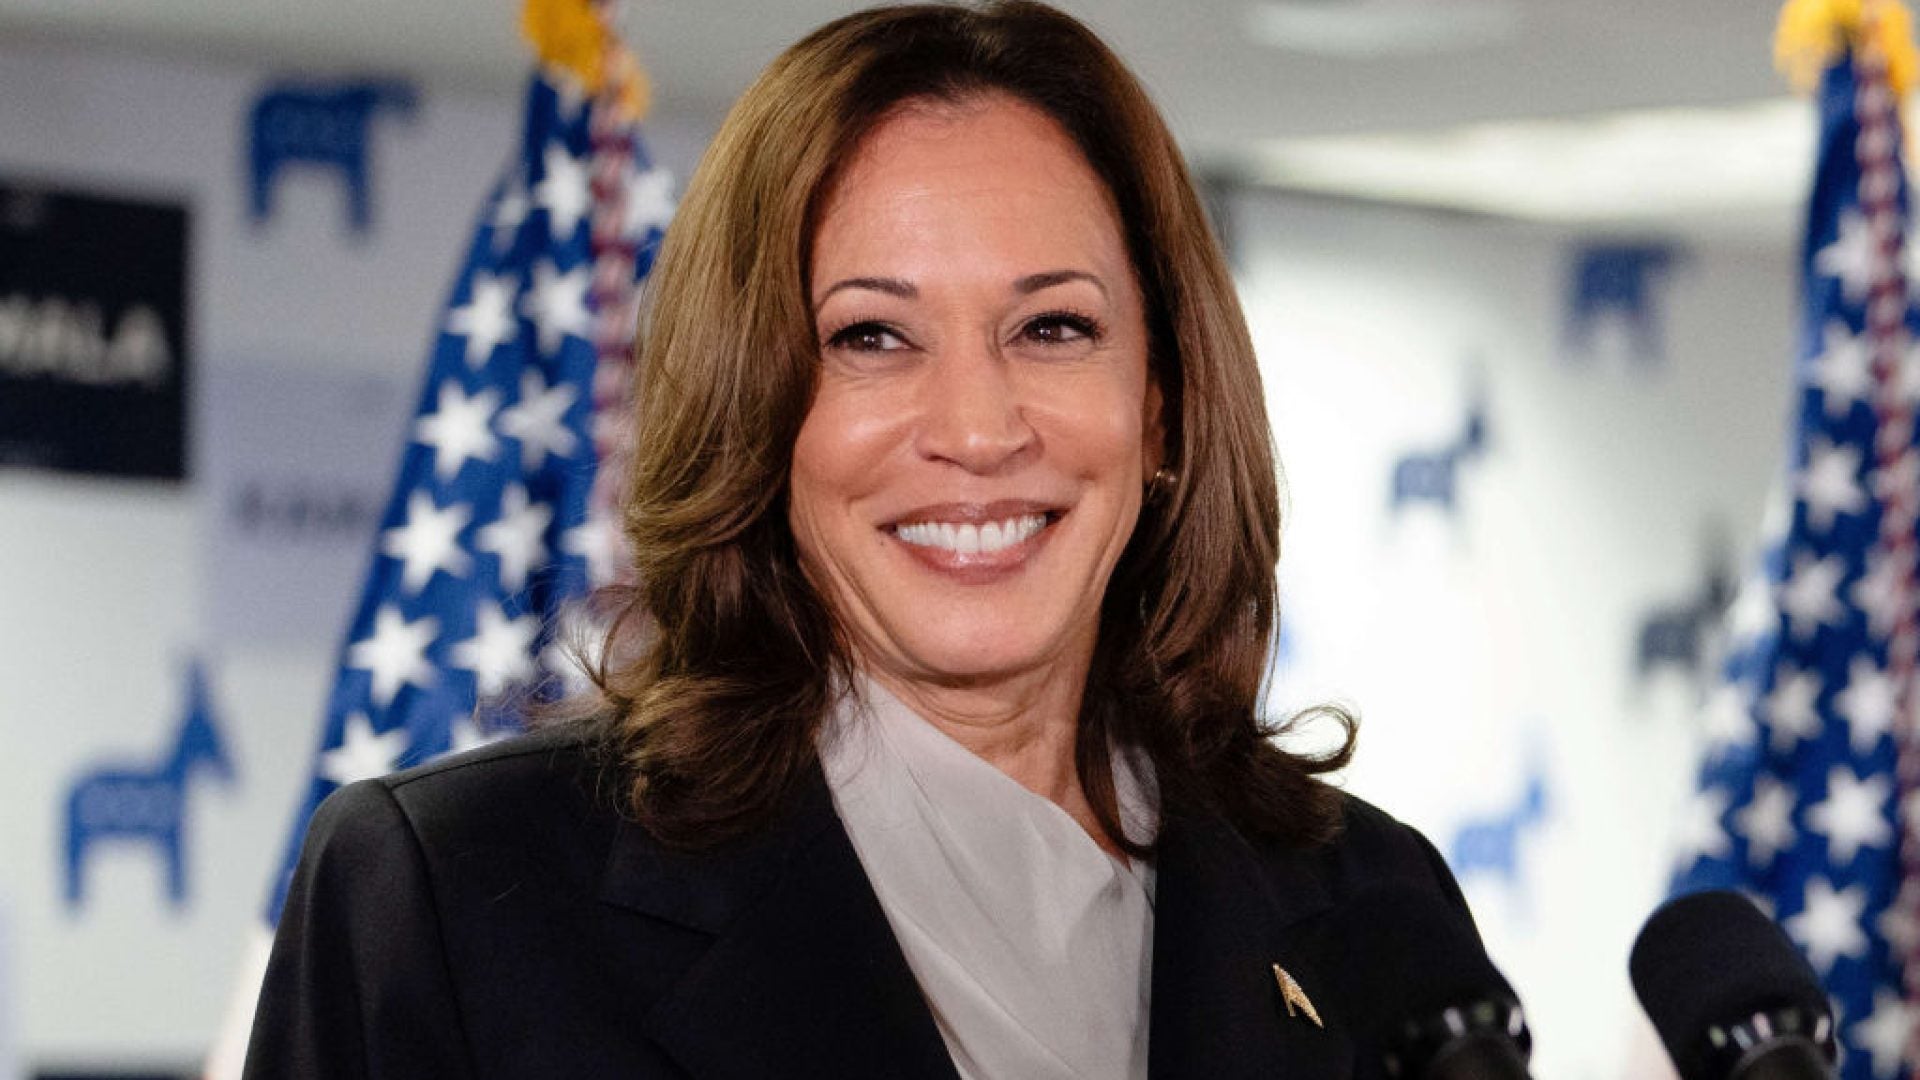 Black Men Are Also With Her: Thousands Join Zoom Call, Raise Over $1 Million For Kamala Harris’ Presidential Campaign